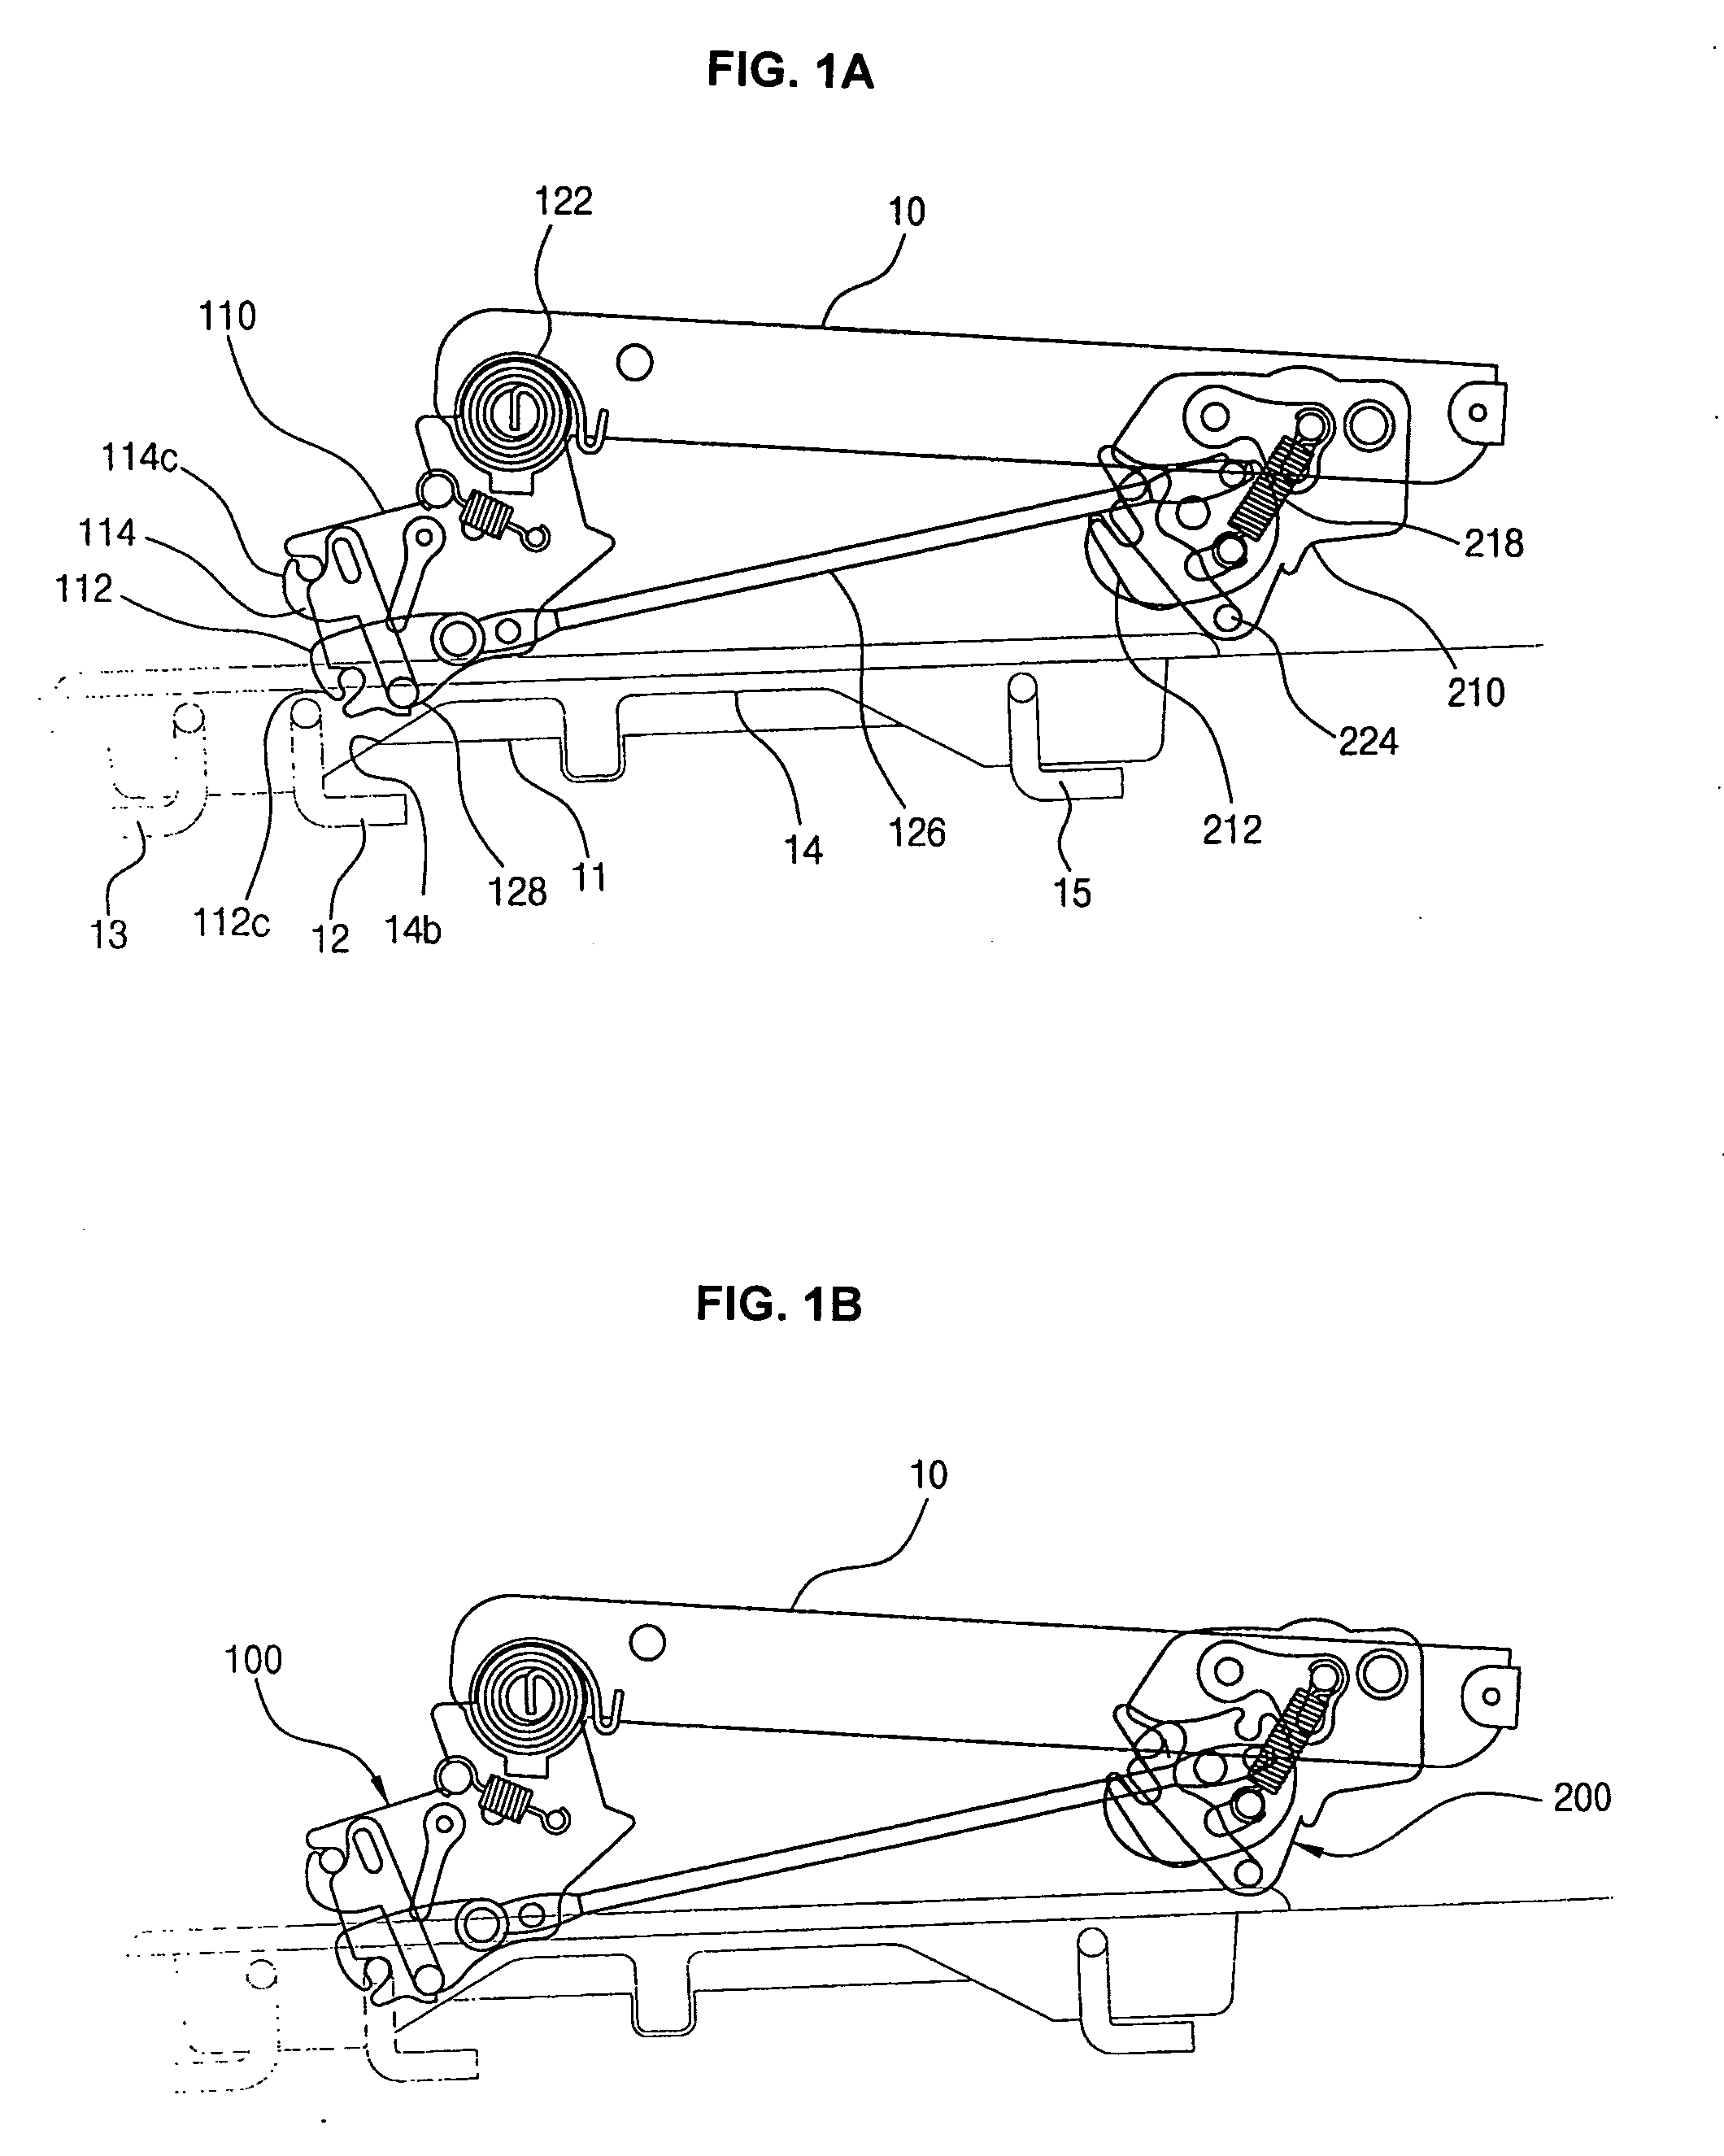 Locking device for a detachable vehicle seat